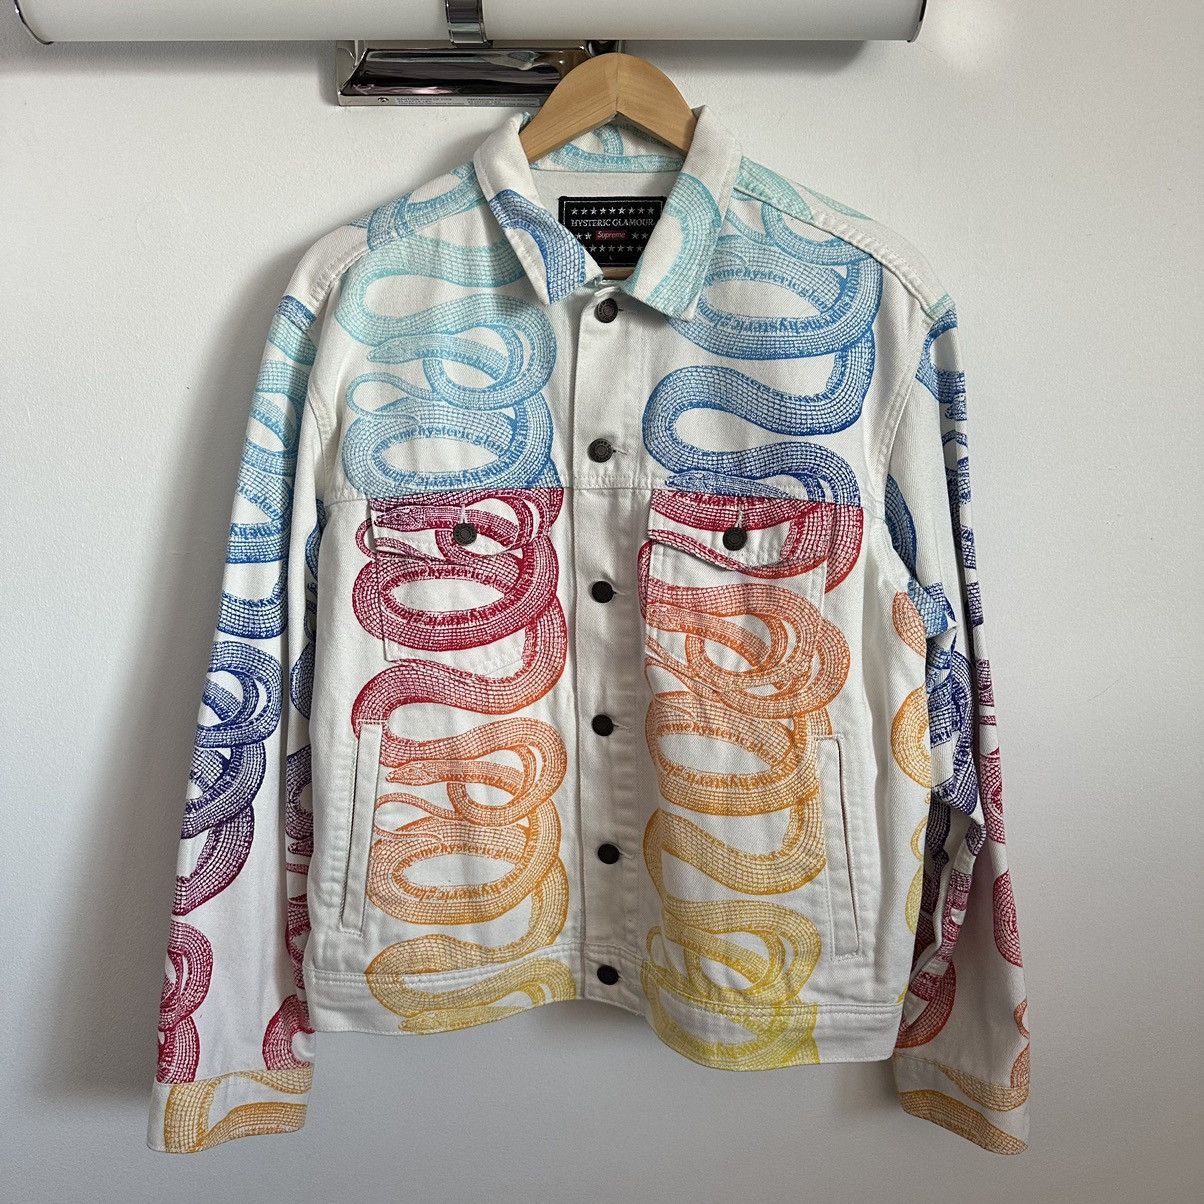 Supreme Hysteric Glamour Snake | Grailed